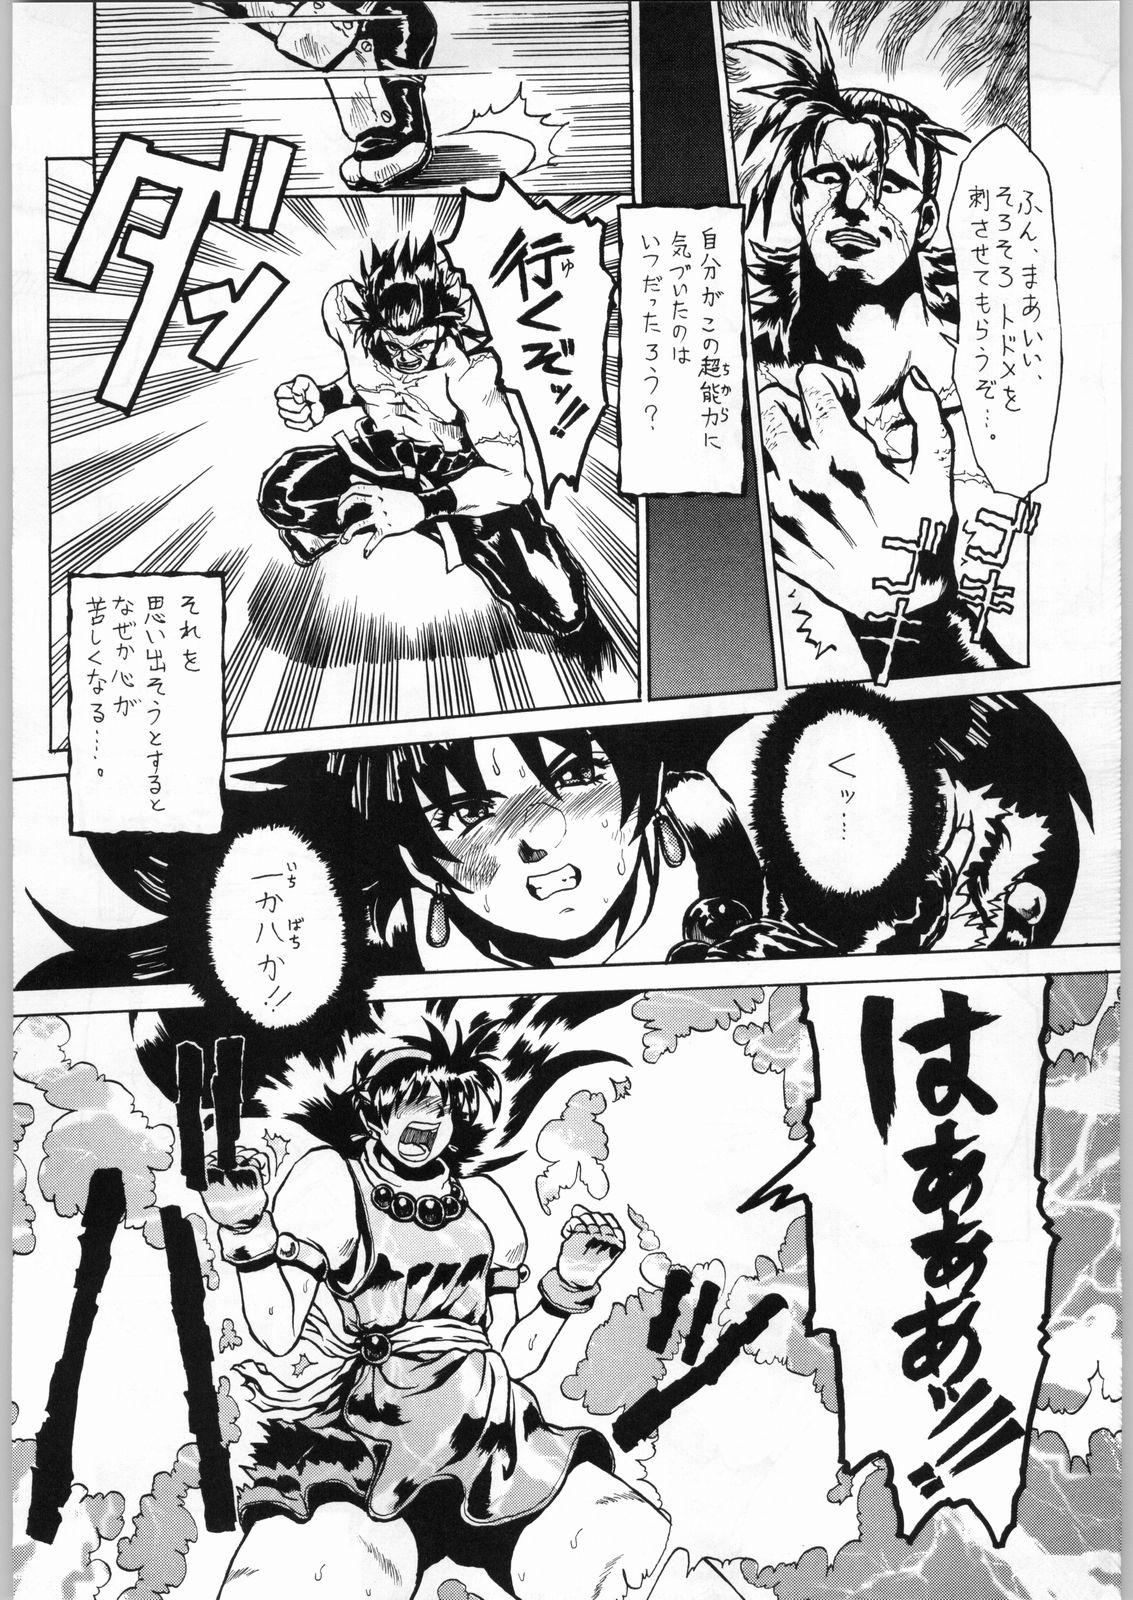 Private Shikiyoku Hokkedan 8 - King of fighters Valkyrie no bouken Blowing - Page 6